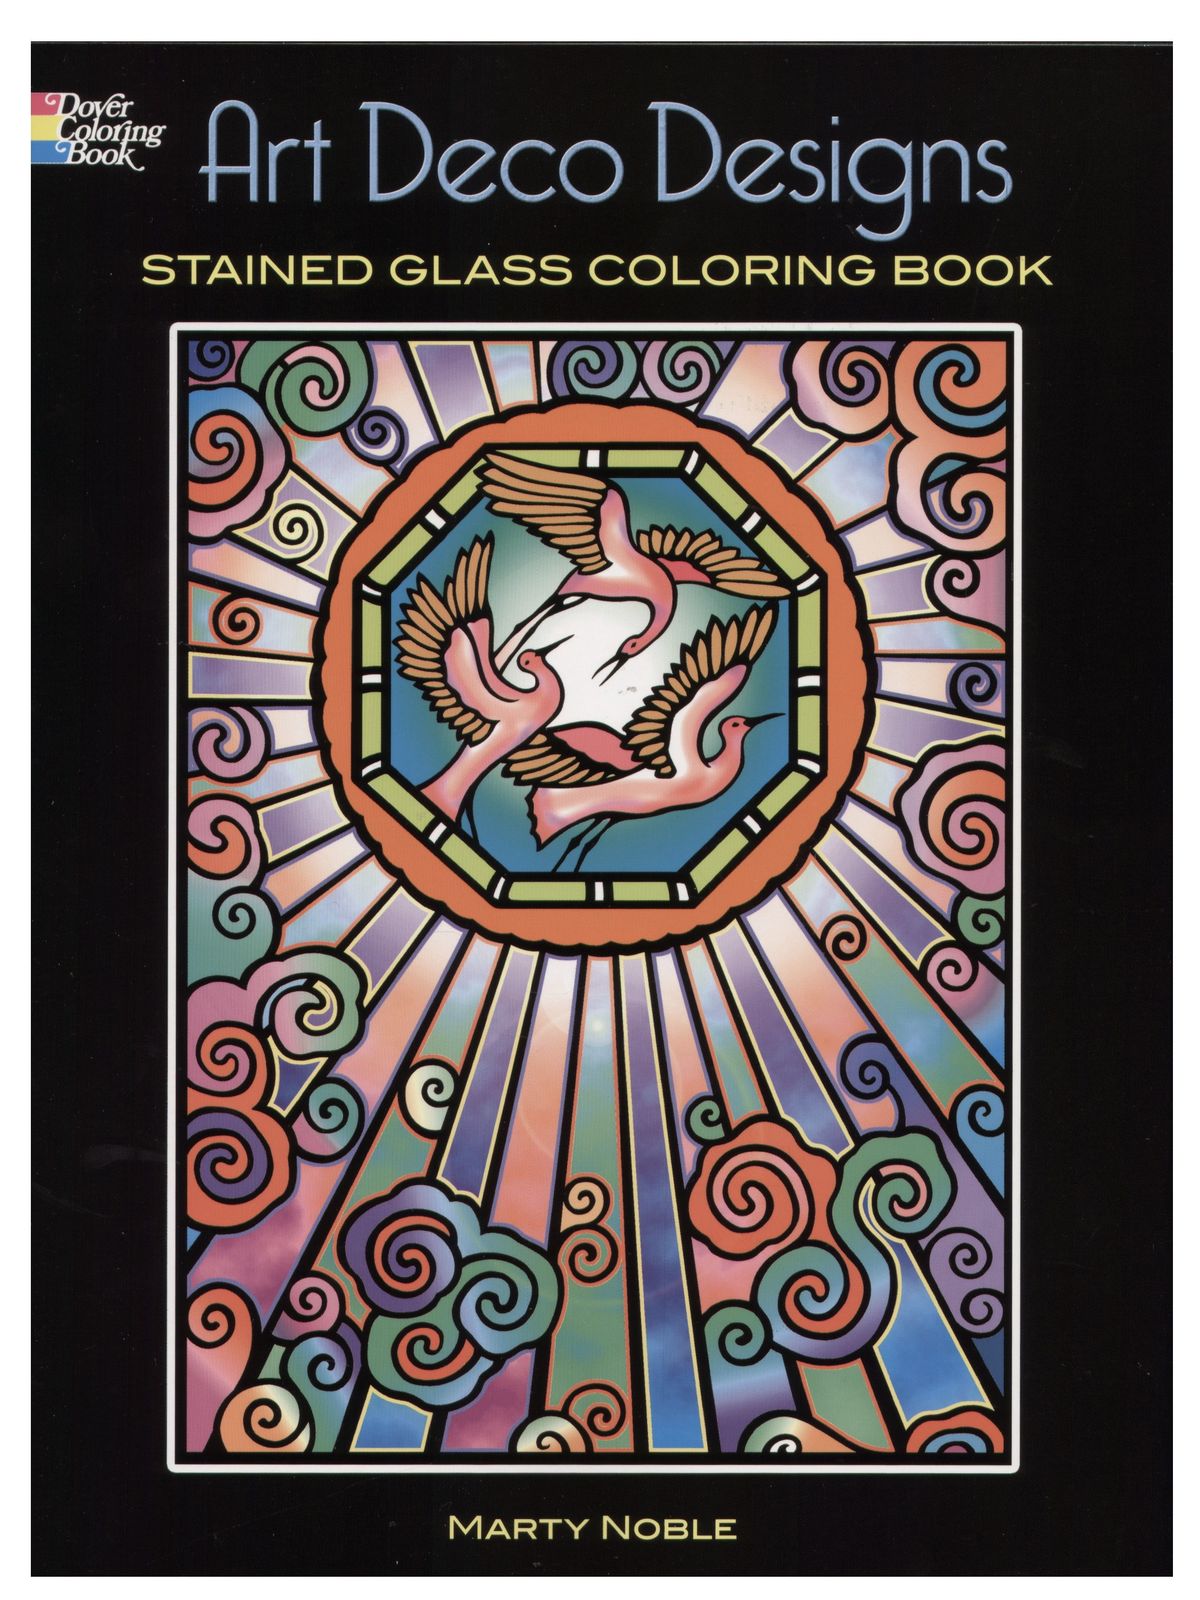 Art Deco Designs Stained Glass Coloring Book Art Deco Designs Stained Glass Coloring Book